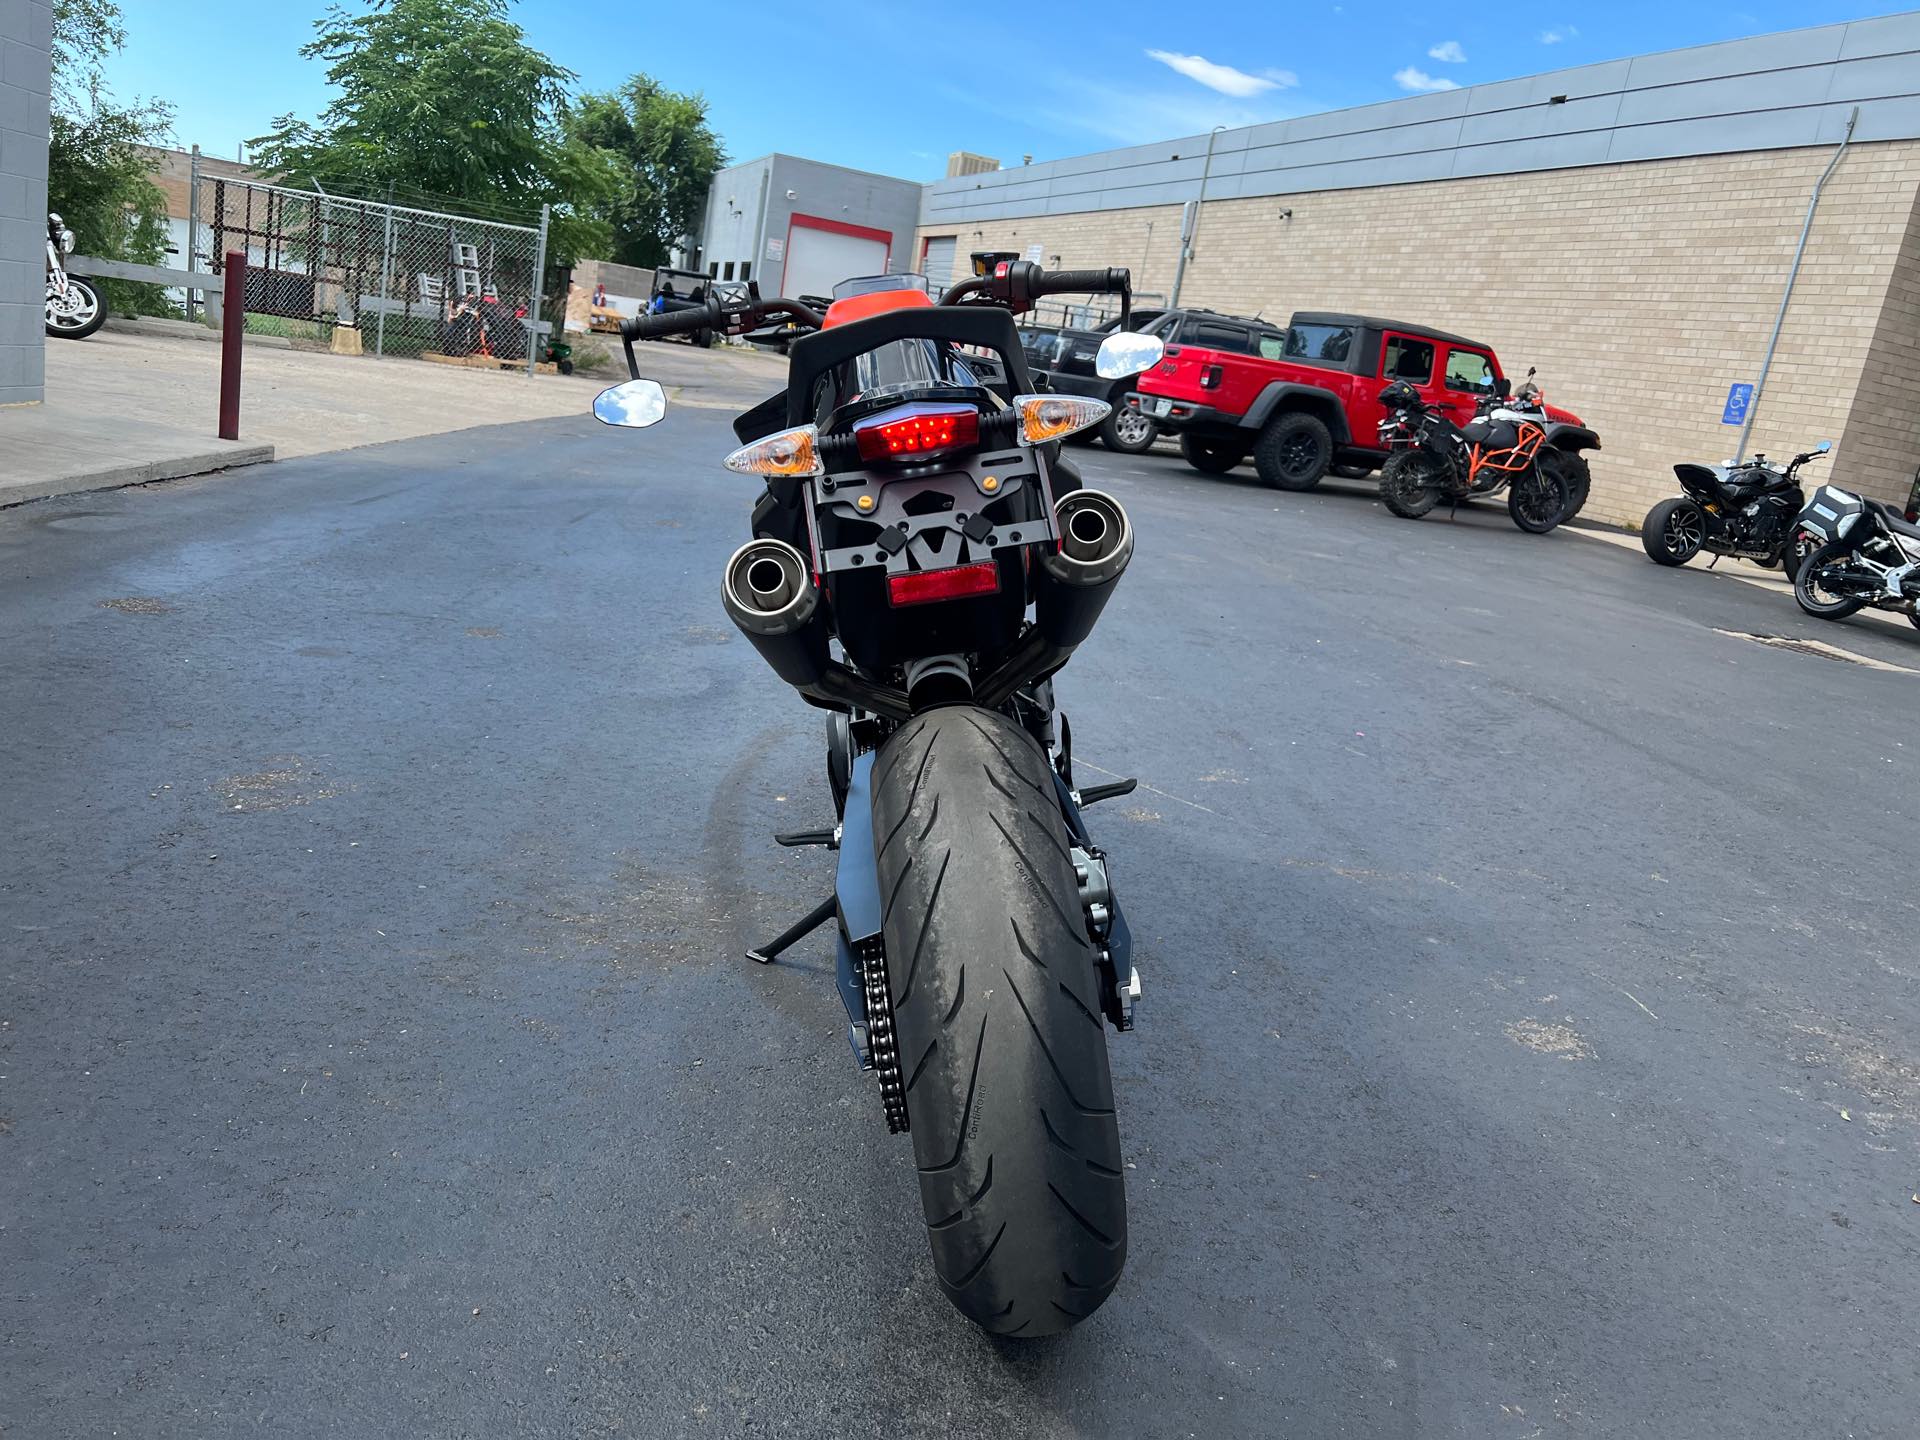 2022 KTM Duke 890 R at Aces Motorcycles - Fort Collins